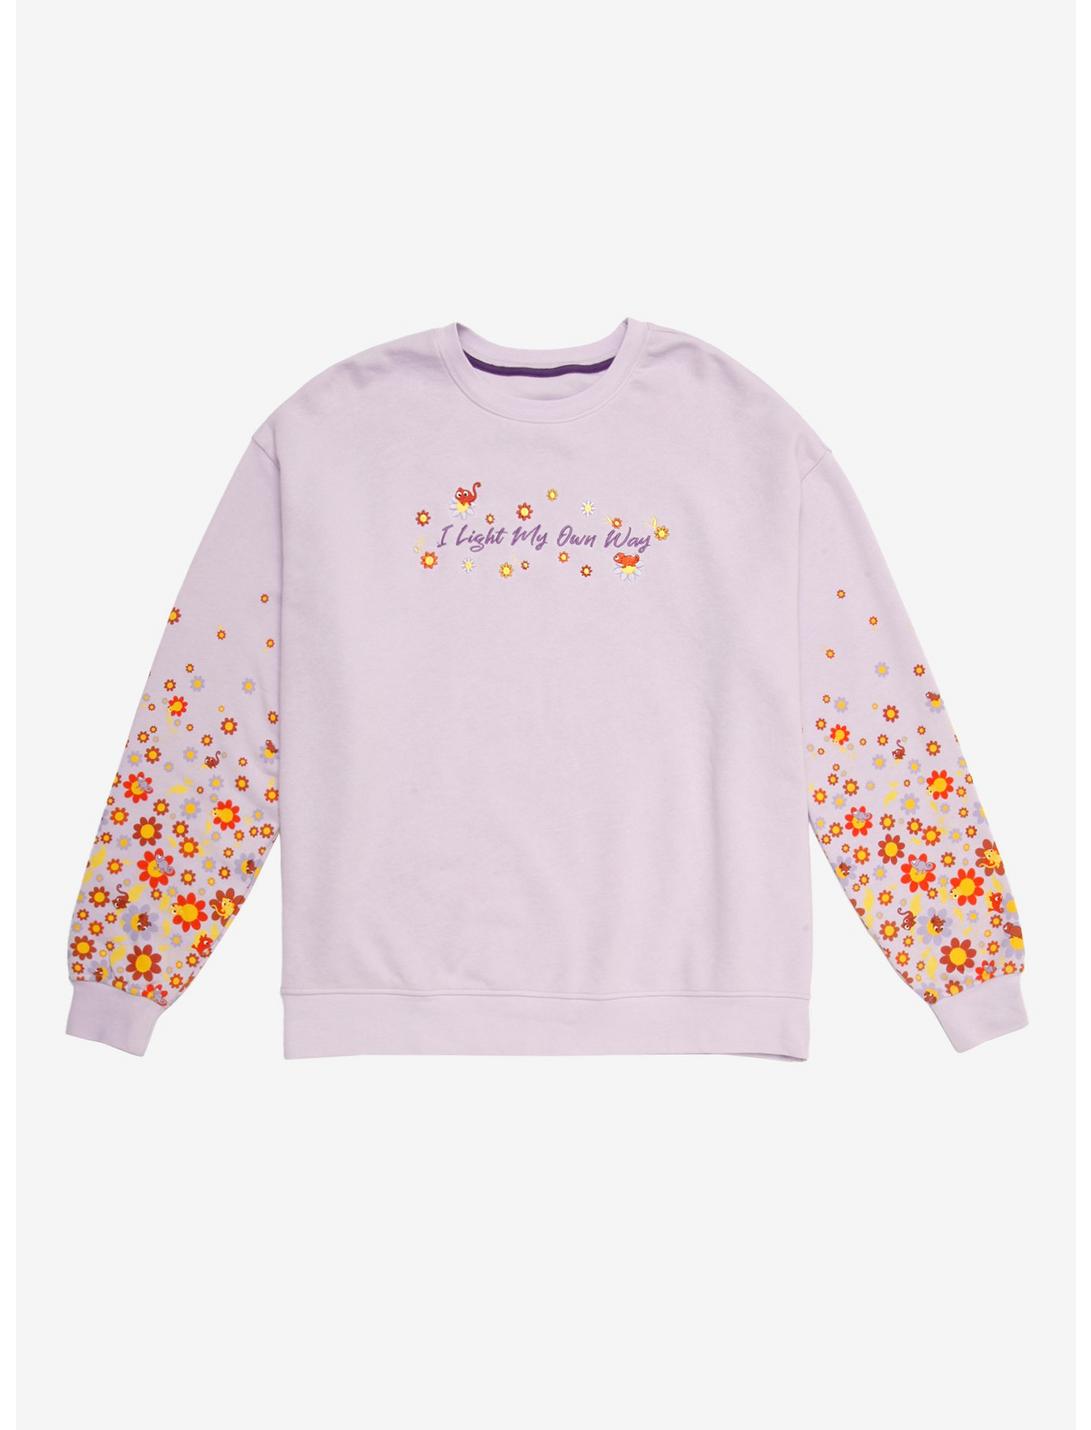 Our Universe Disney Tangled Light My Own Way Crewneck - BoxLunch Exclusive, LAVENDER, hi-res